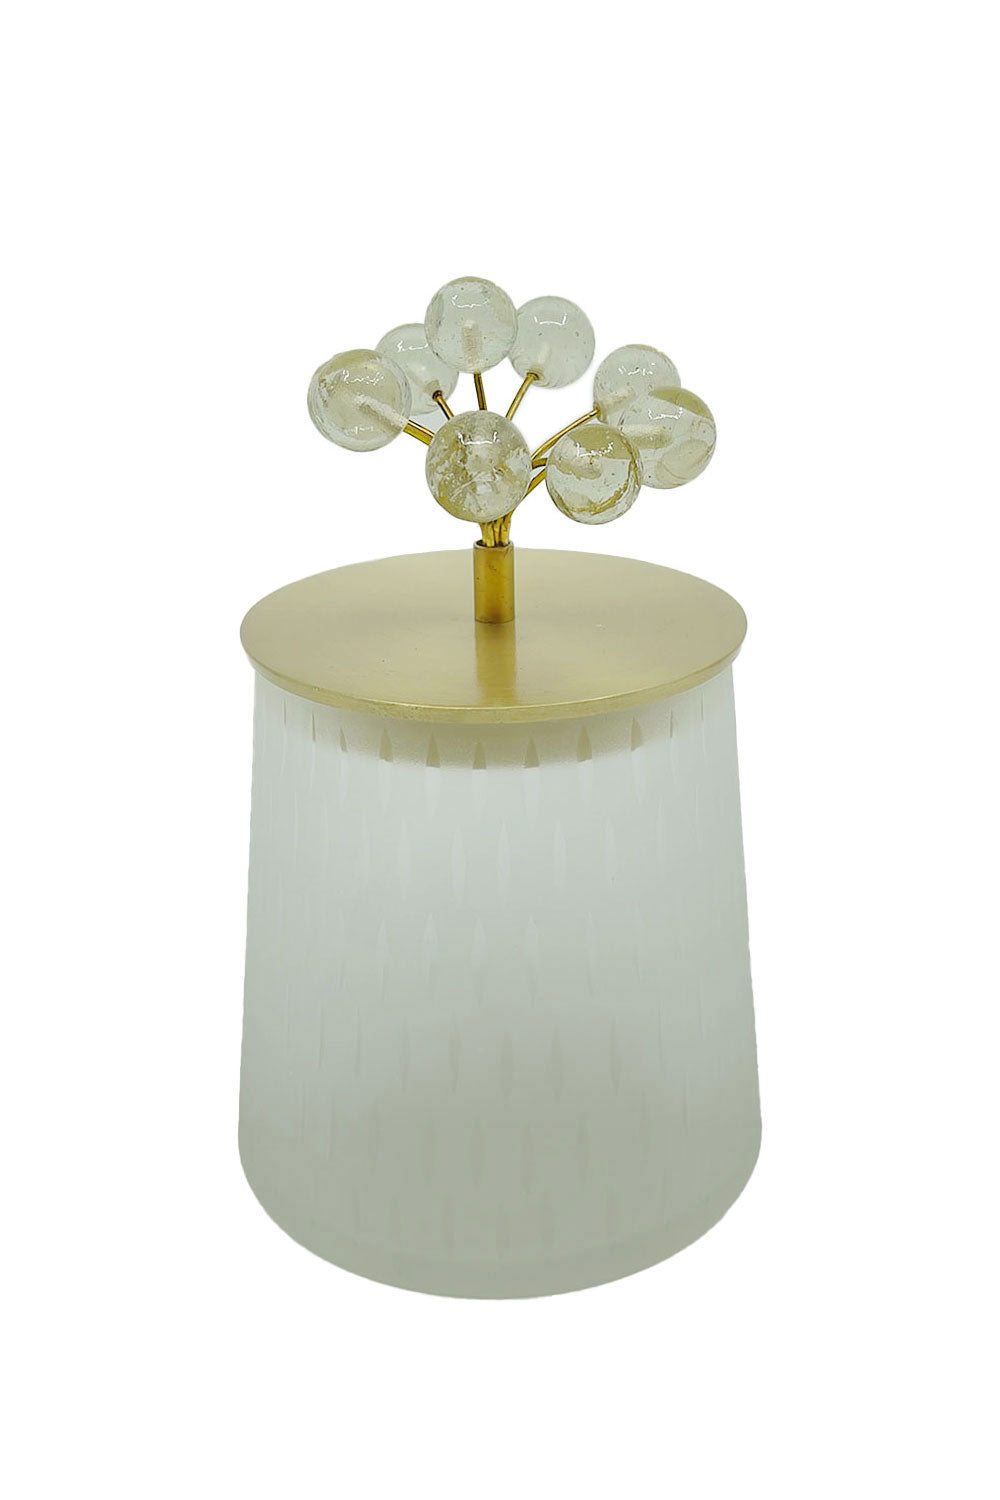 Rice Bonbon Jar with Lid, Small, Clear Flower